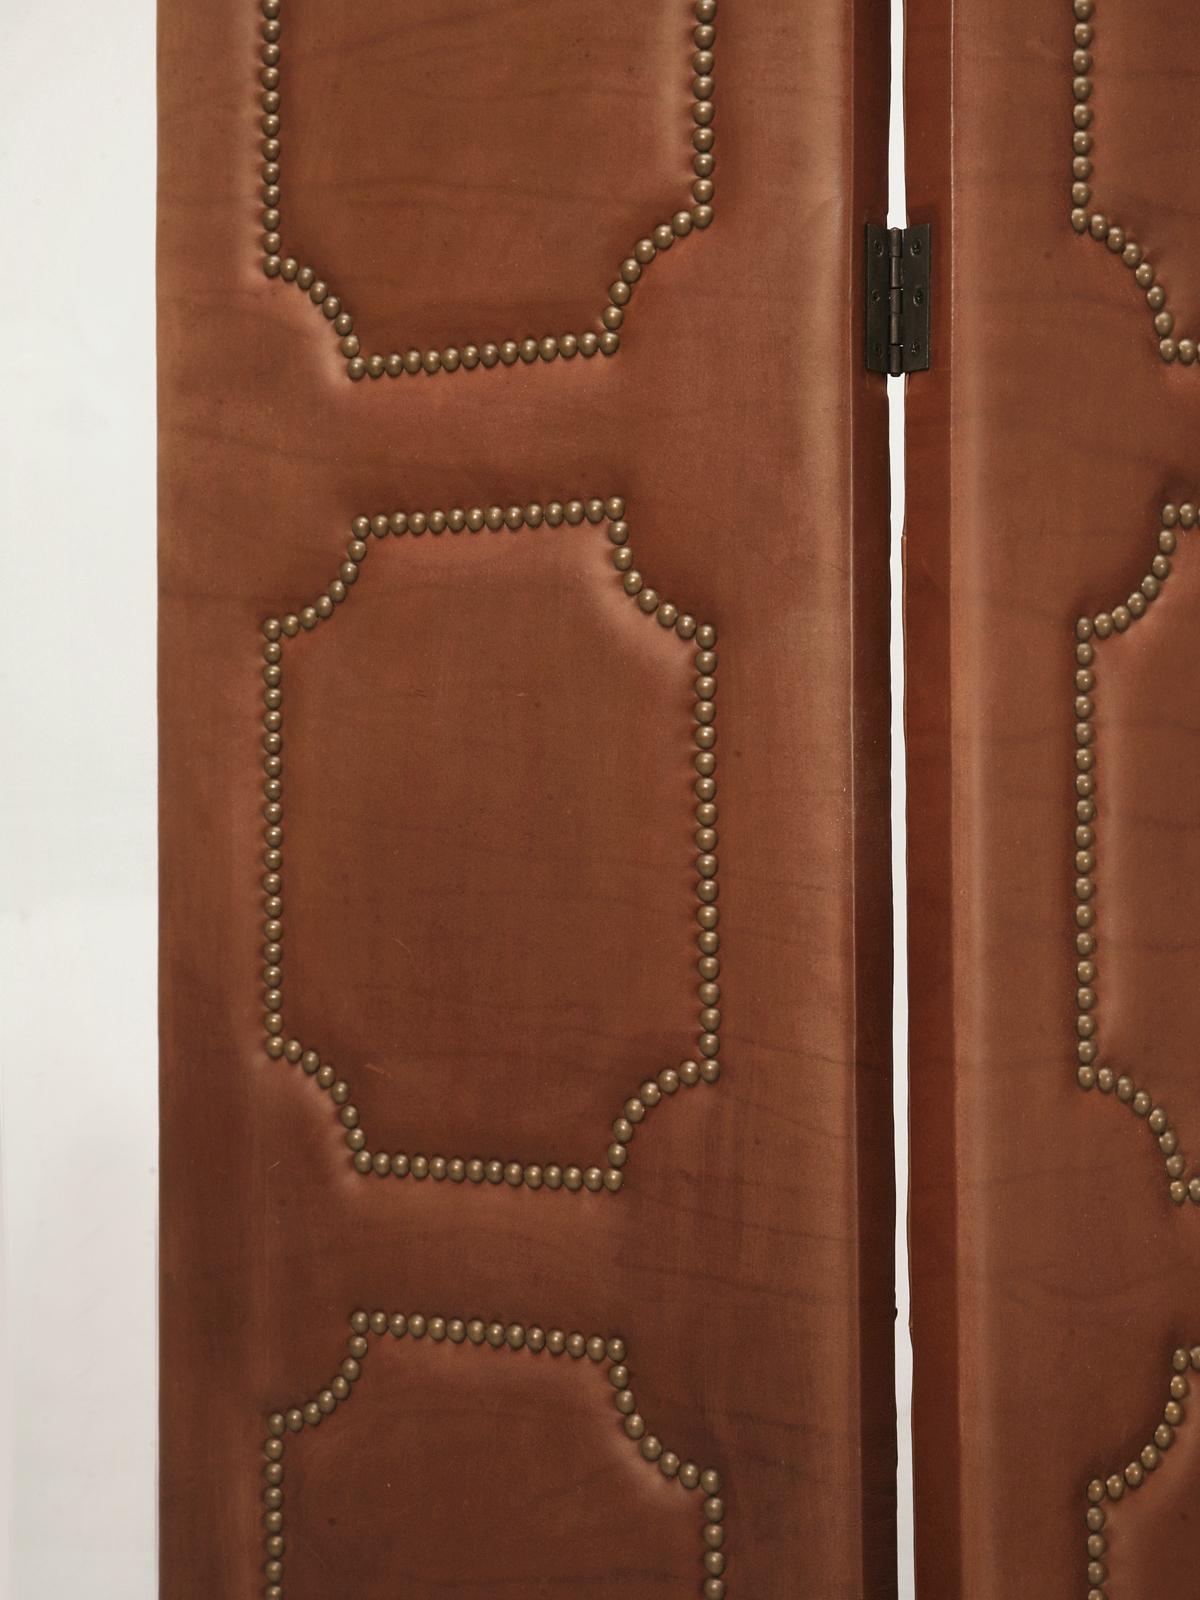 Leather Four-Panel Folding Screen or Room Divider with Bronze Nails Very Heavy For Sale 1